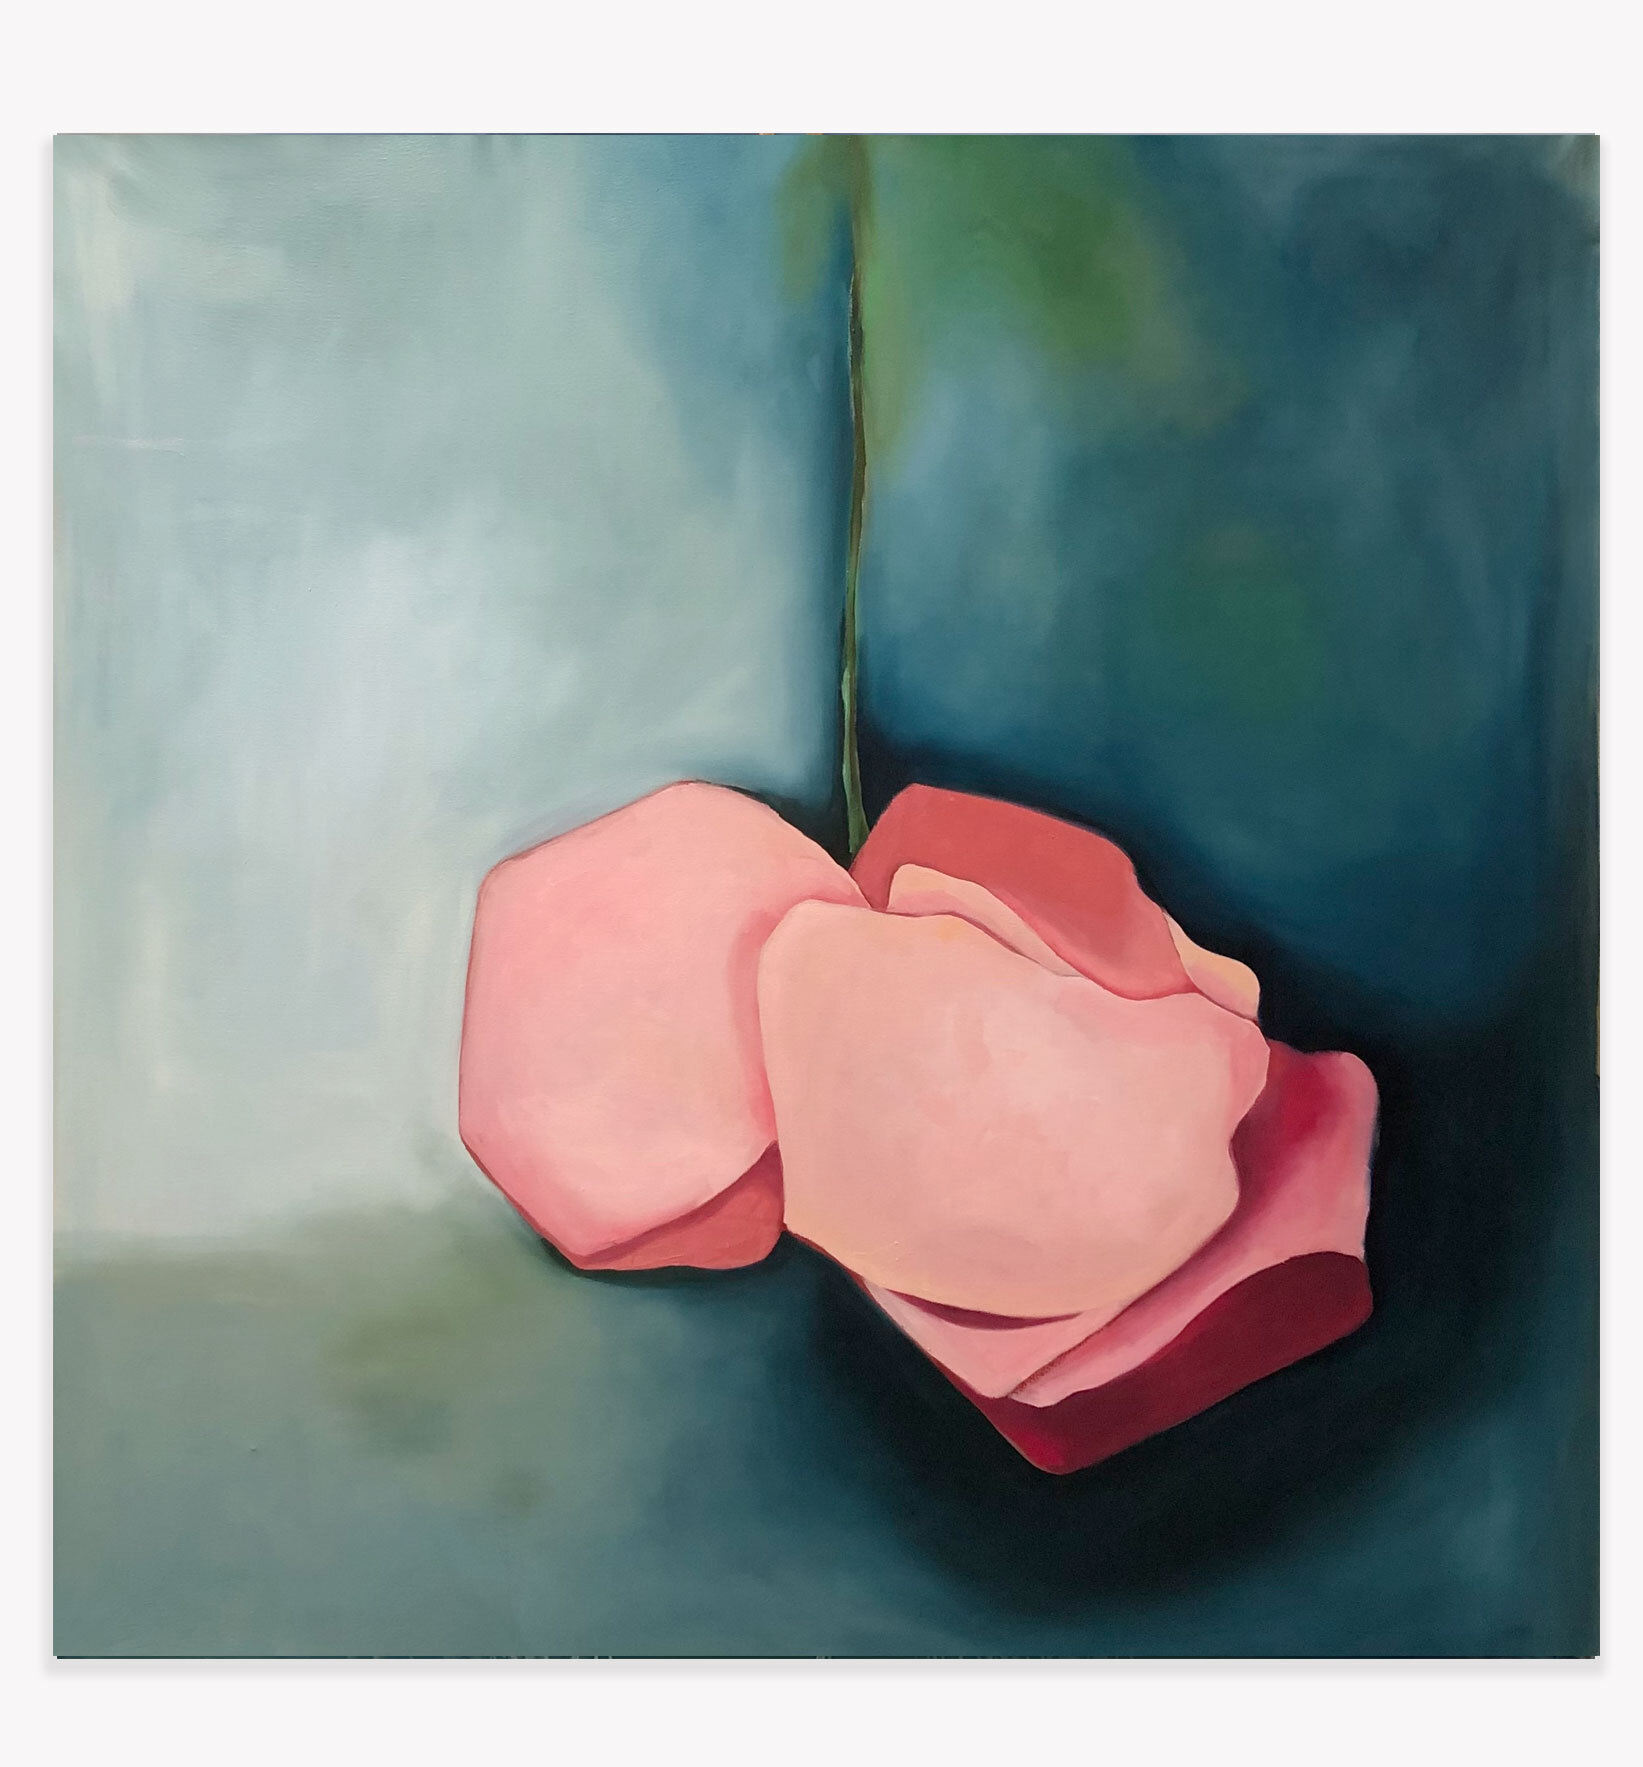   Submerged Rose , Kristi Head 2021. Oil on canvas, 65 x 66 inches. 